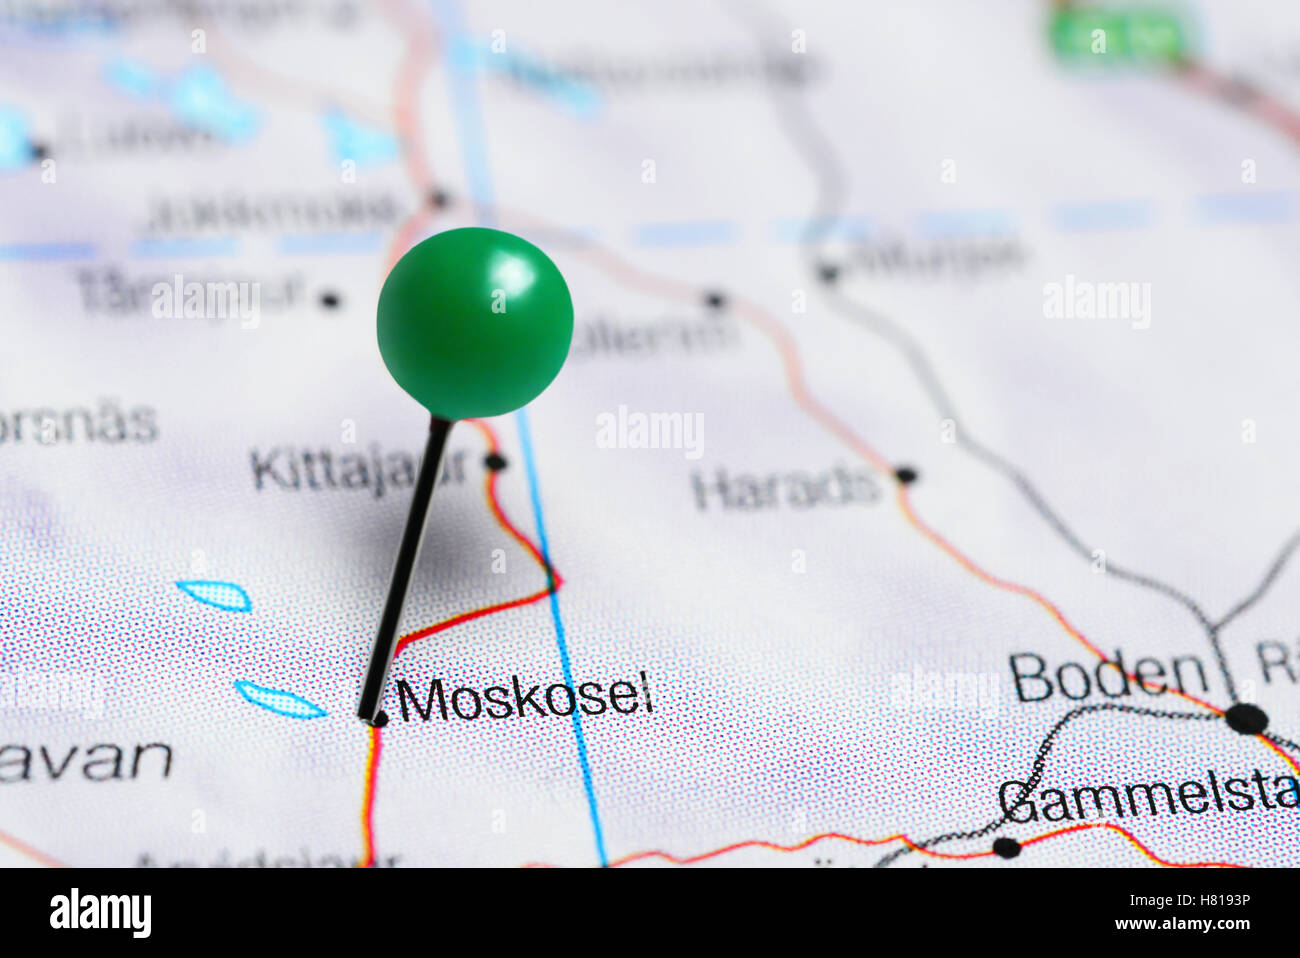 Moskosel pinned on a map of Sweden Stock Photo